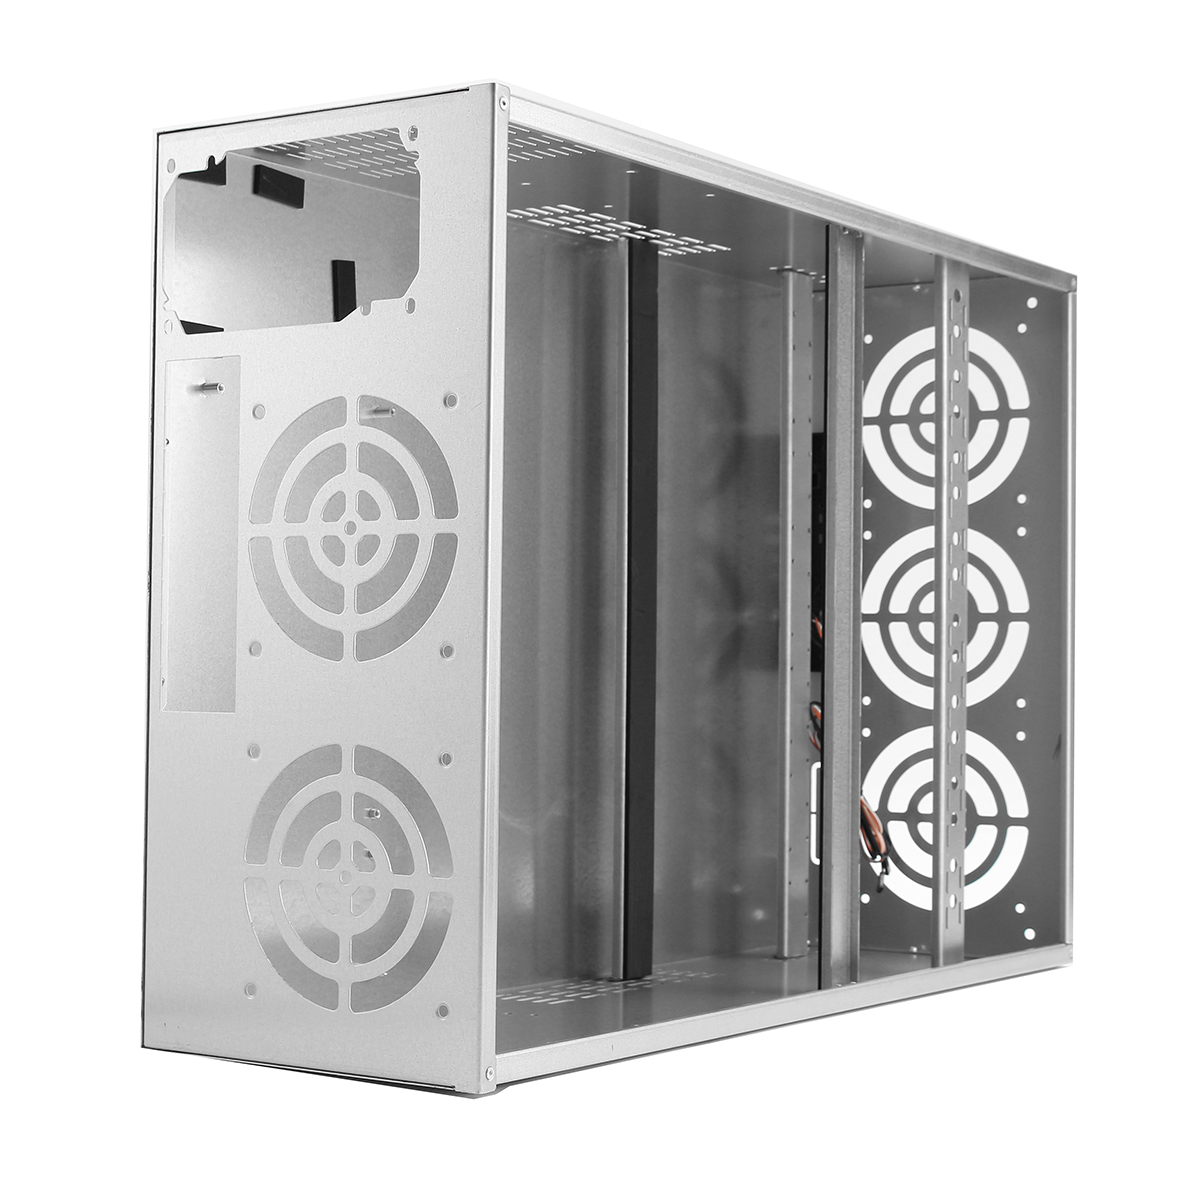 Crypto-Coin-Open-Air-Mining-Frame-Rig-Graphics-Case-For-6-8-GPU-ETH-BTC-Ethereum-1205686